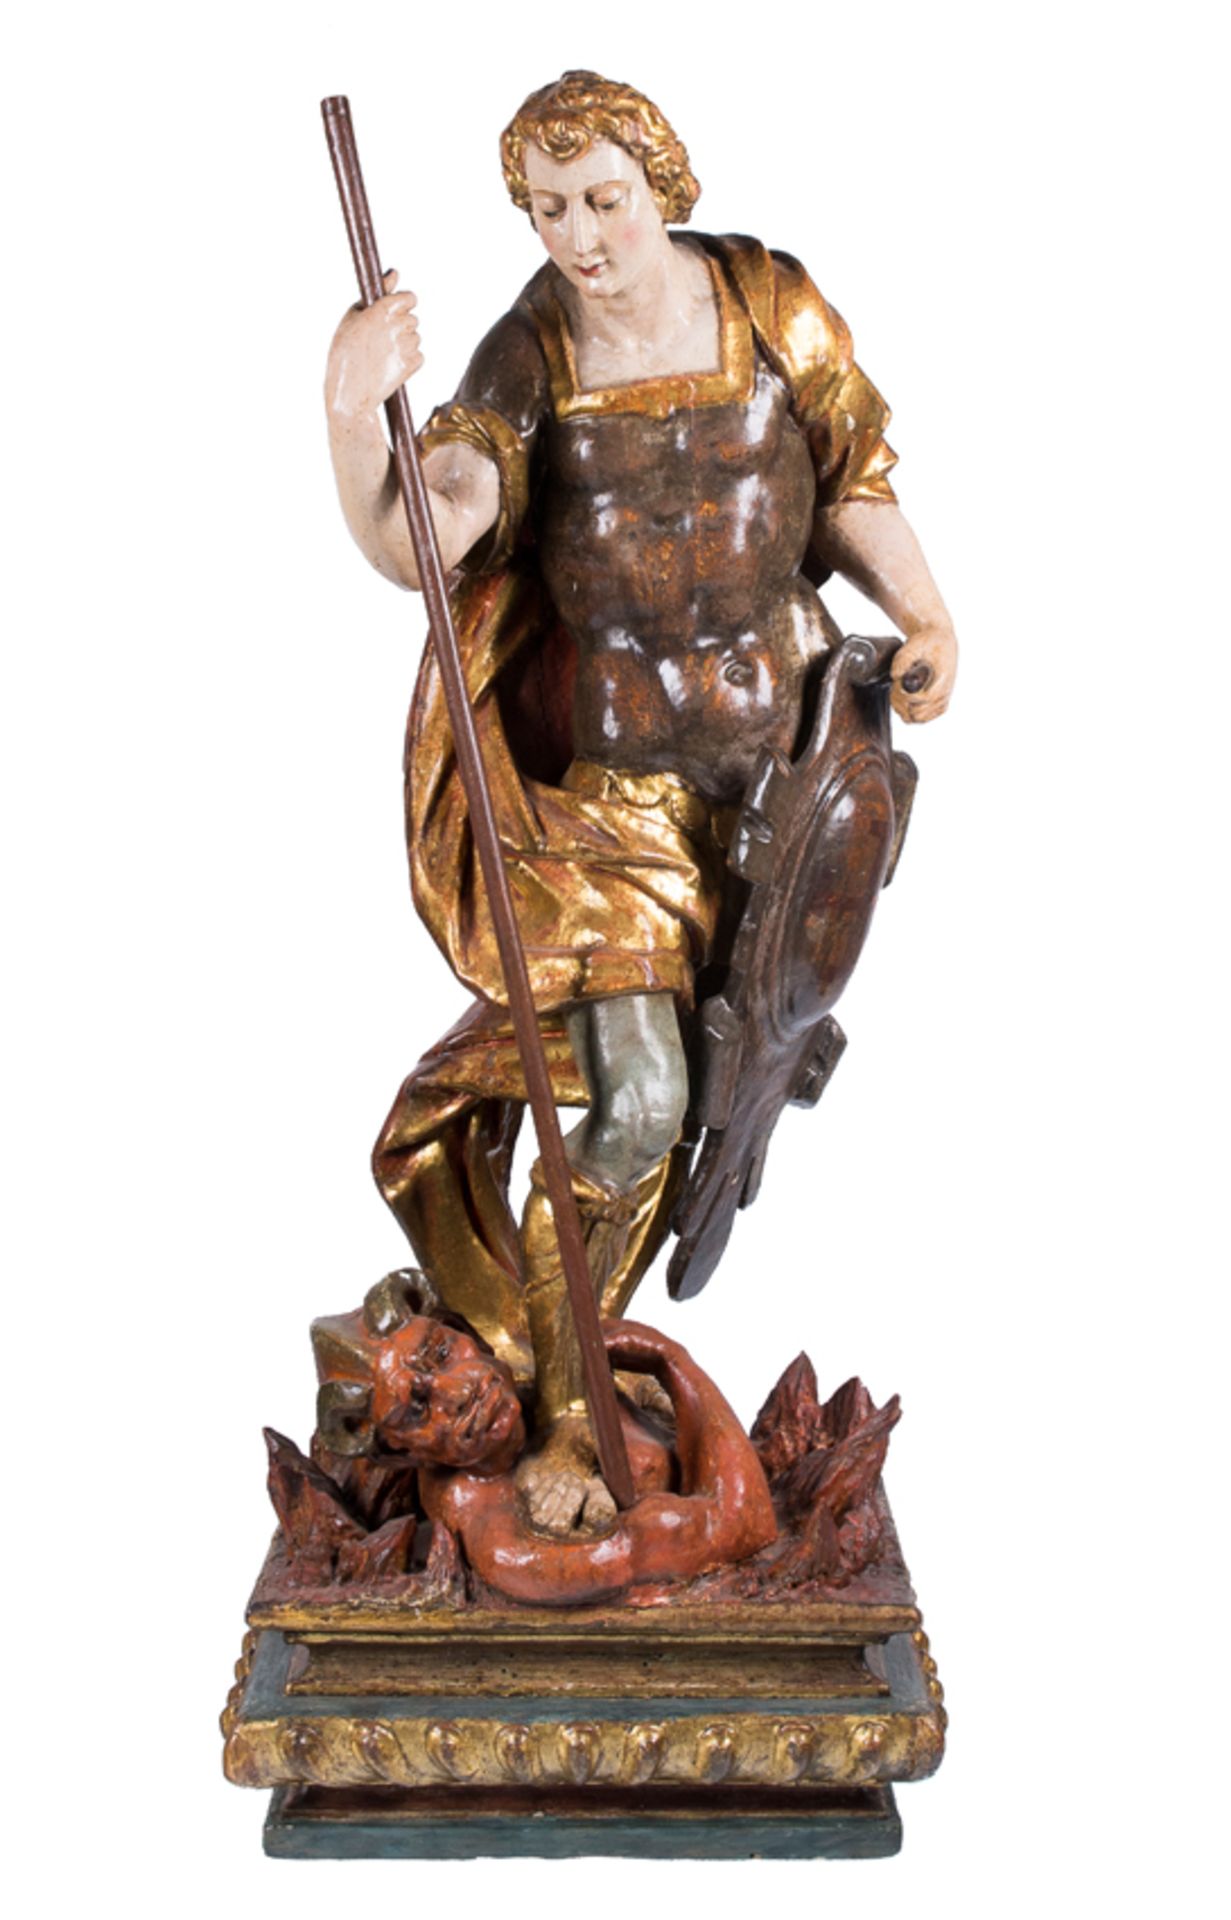 &quot;Saint Michael defeating the devil&quot;. Carved, gilded and polychromed wooden sculpture. Cast